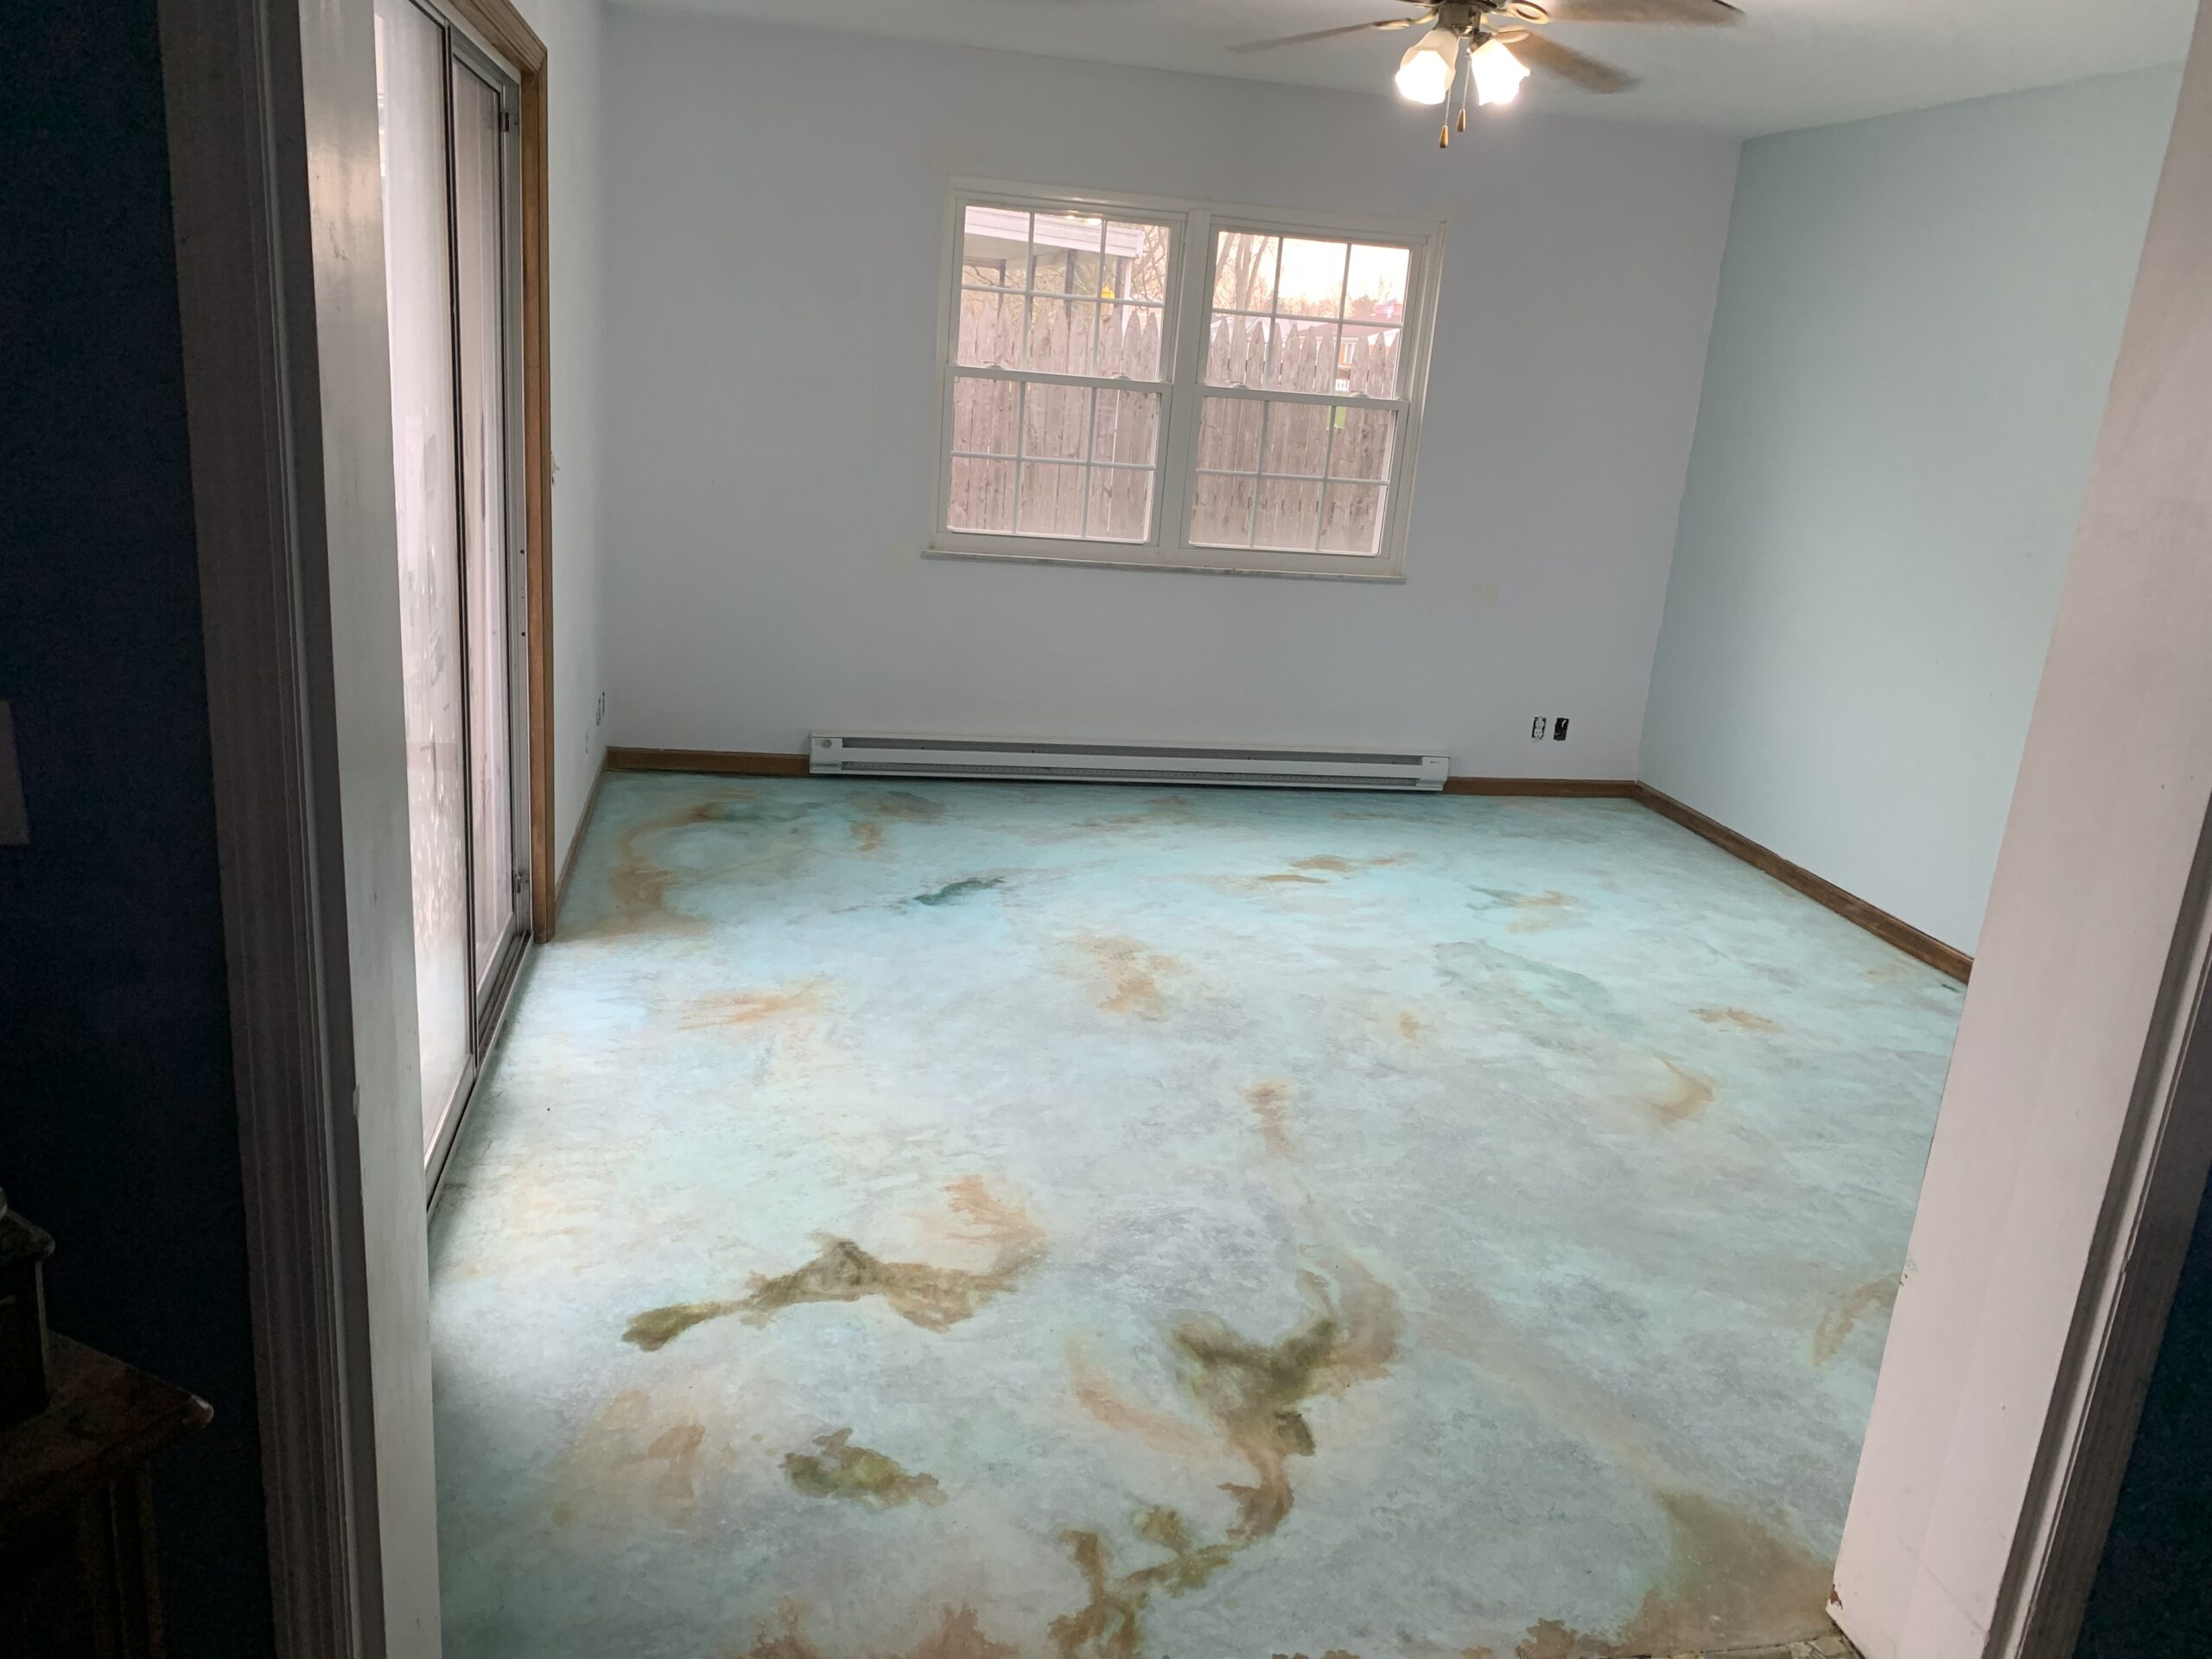 Concrete floor after Azure Blue and Shifting Sand stain application, prior to neutralization